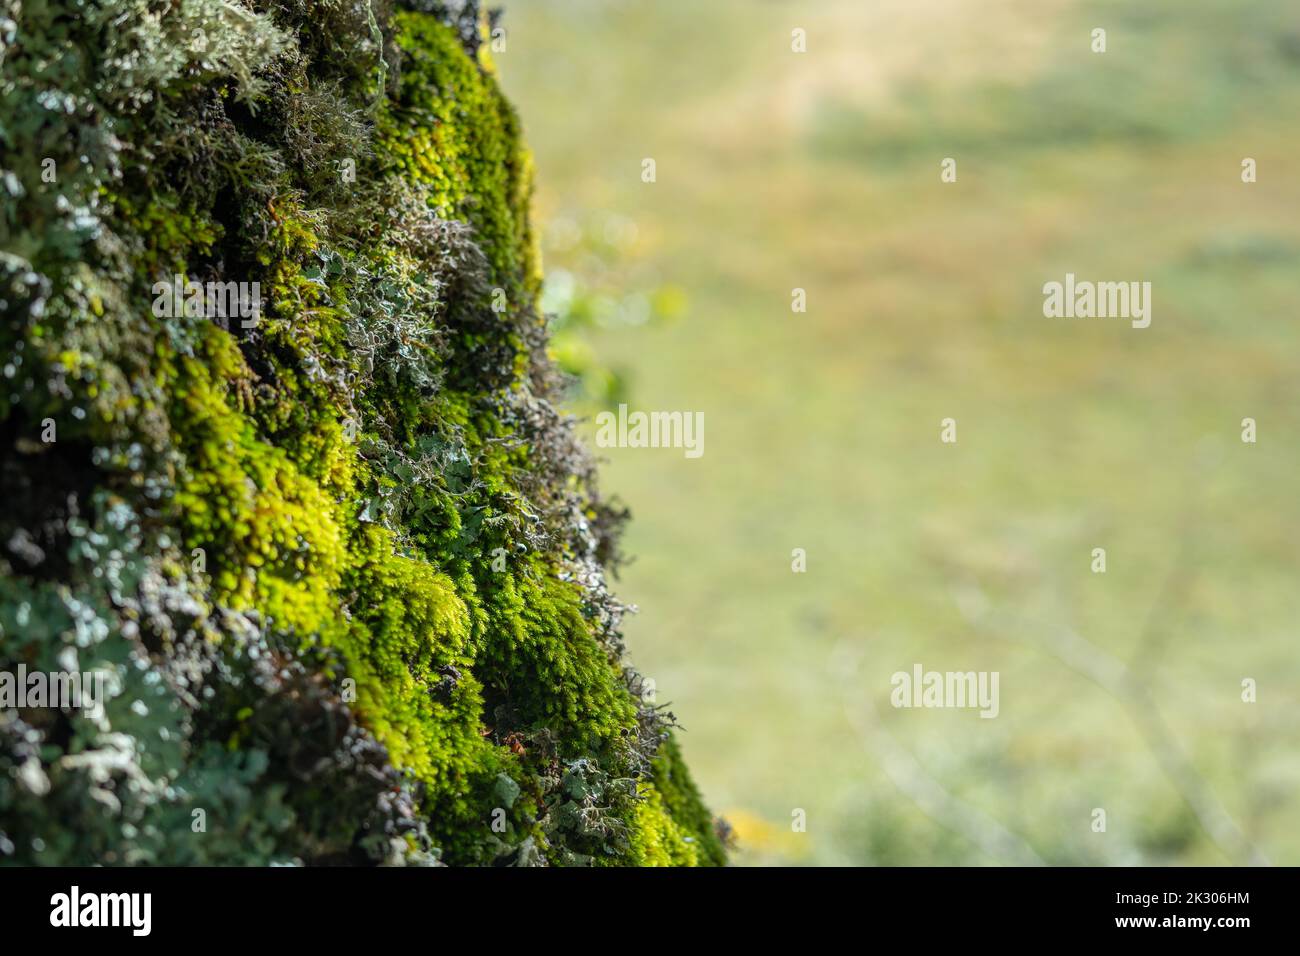 Green moss on tree with blurred background and neutral space Stock Photo